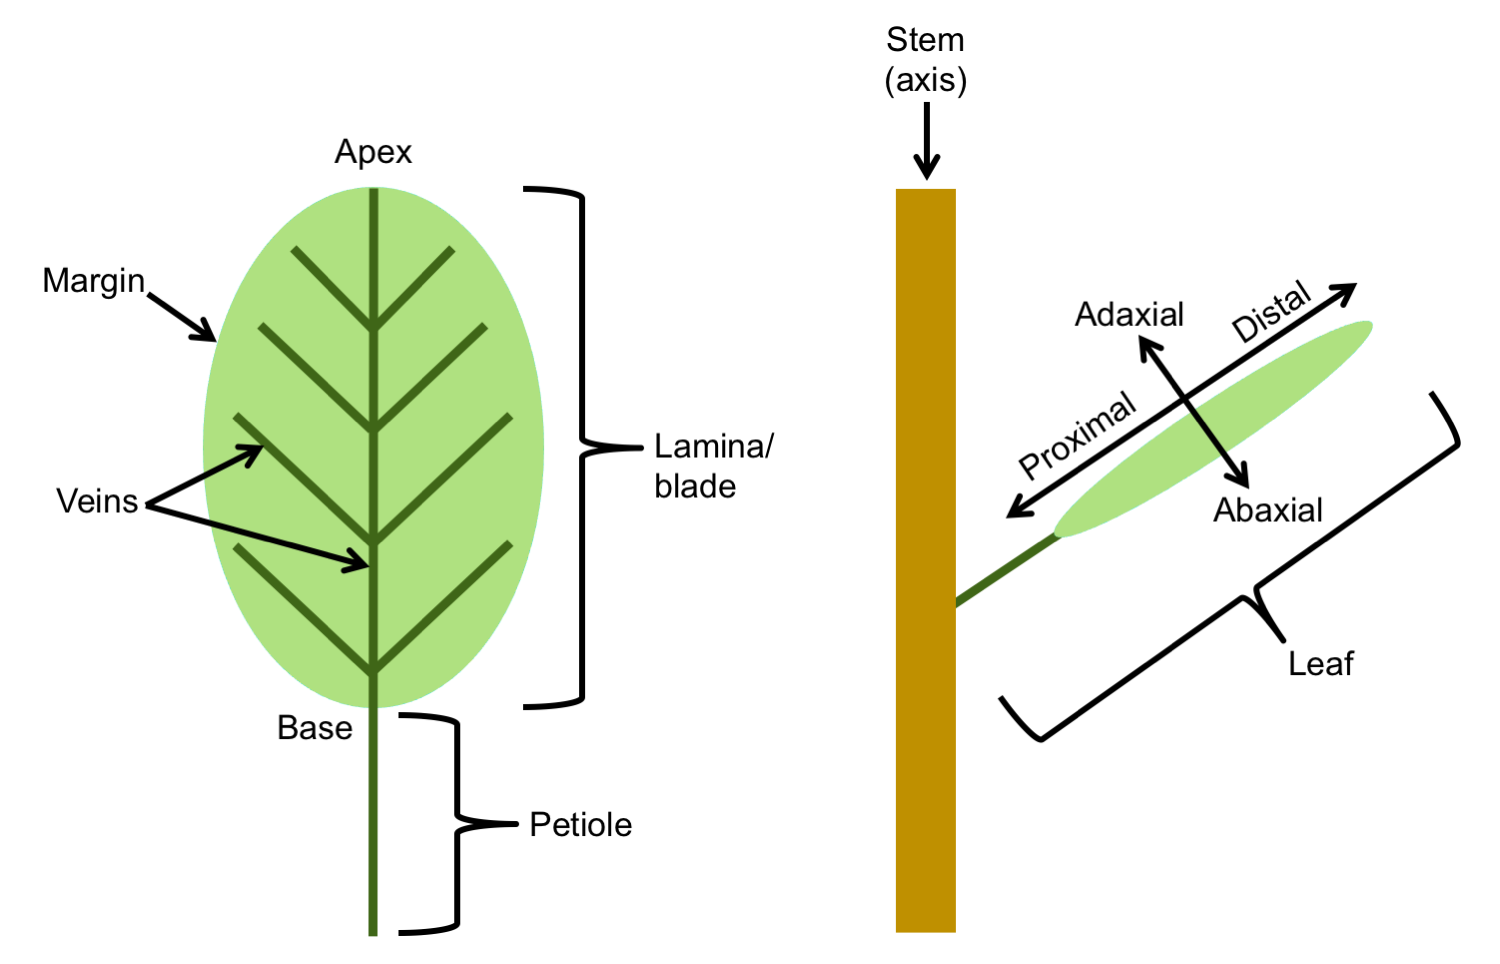 2 Diagrams. Diagram 1: Parts of a leaf. Diagram 2: Leaf attached to a stem with terms for directions labelled.